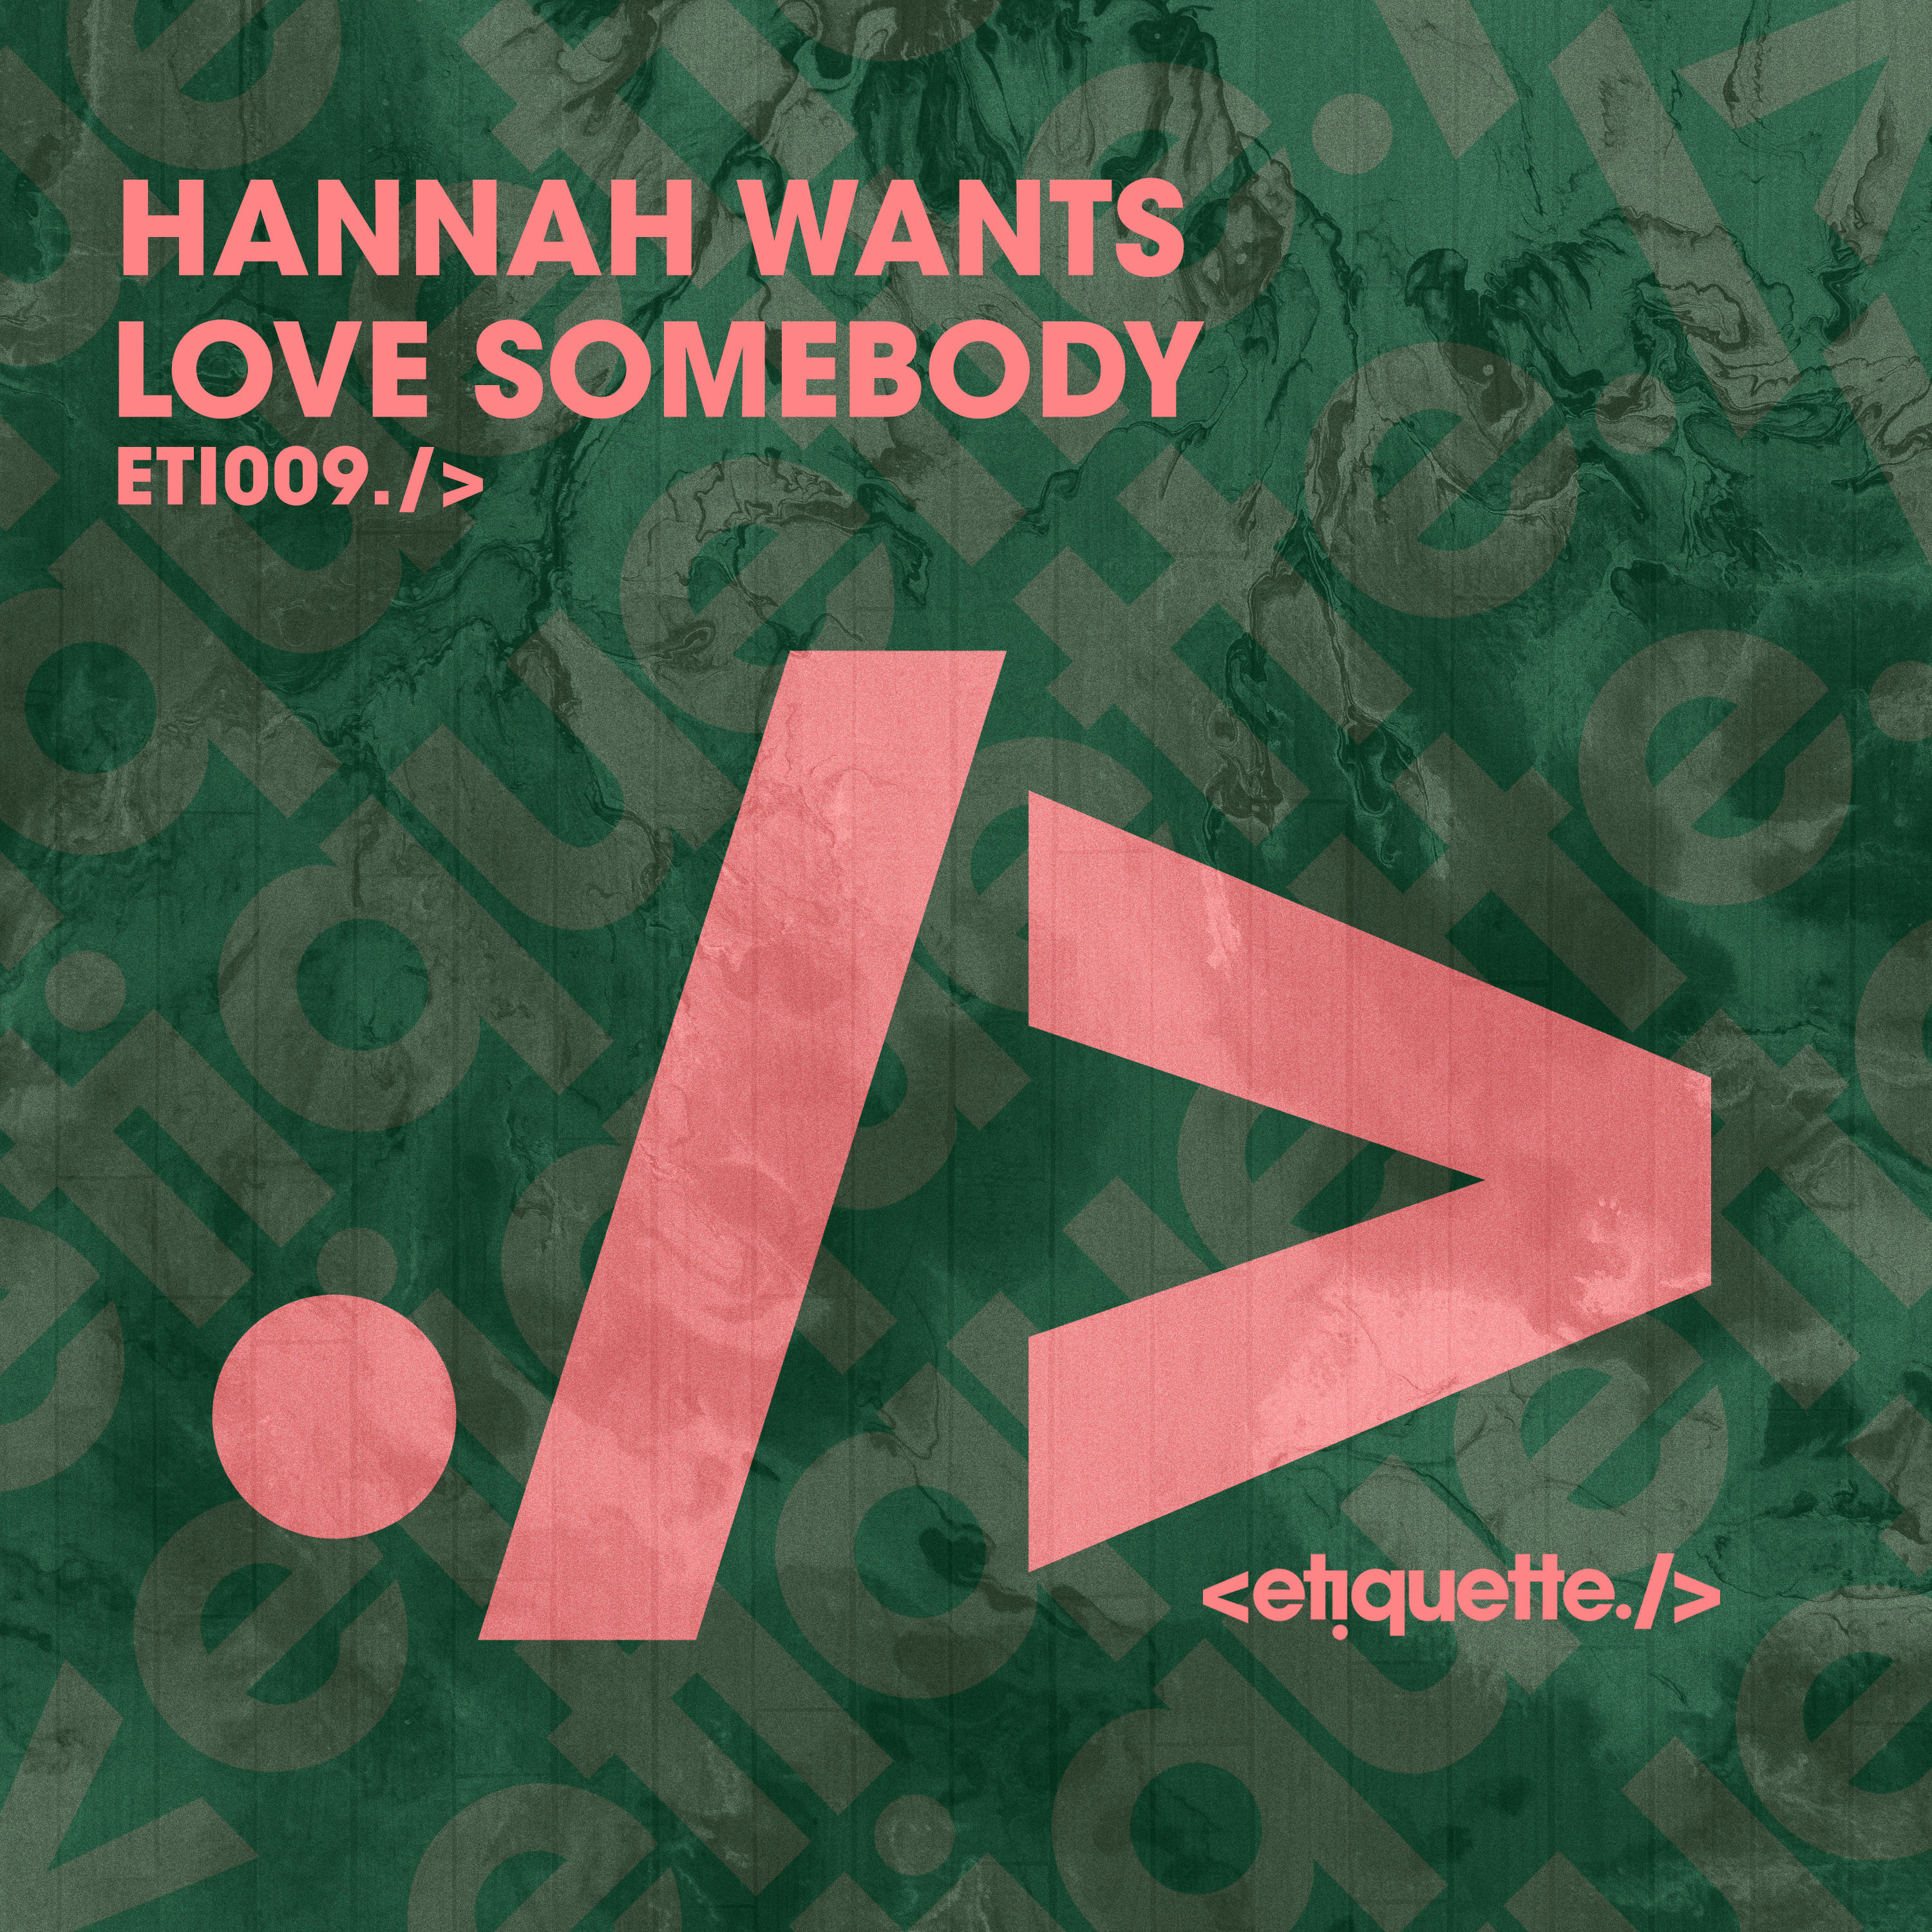 ‘Love Somebody’ with Hannah Wants’ New Single